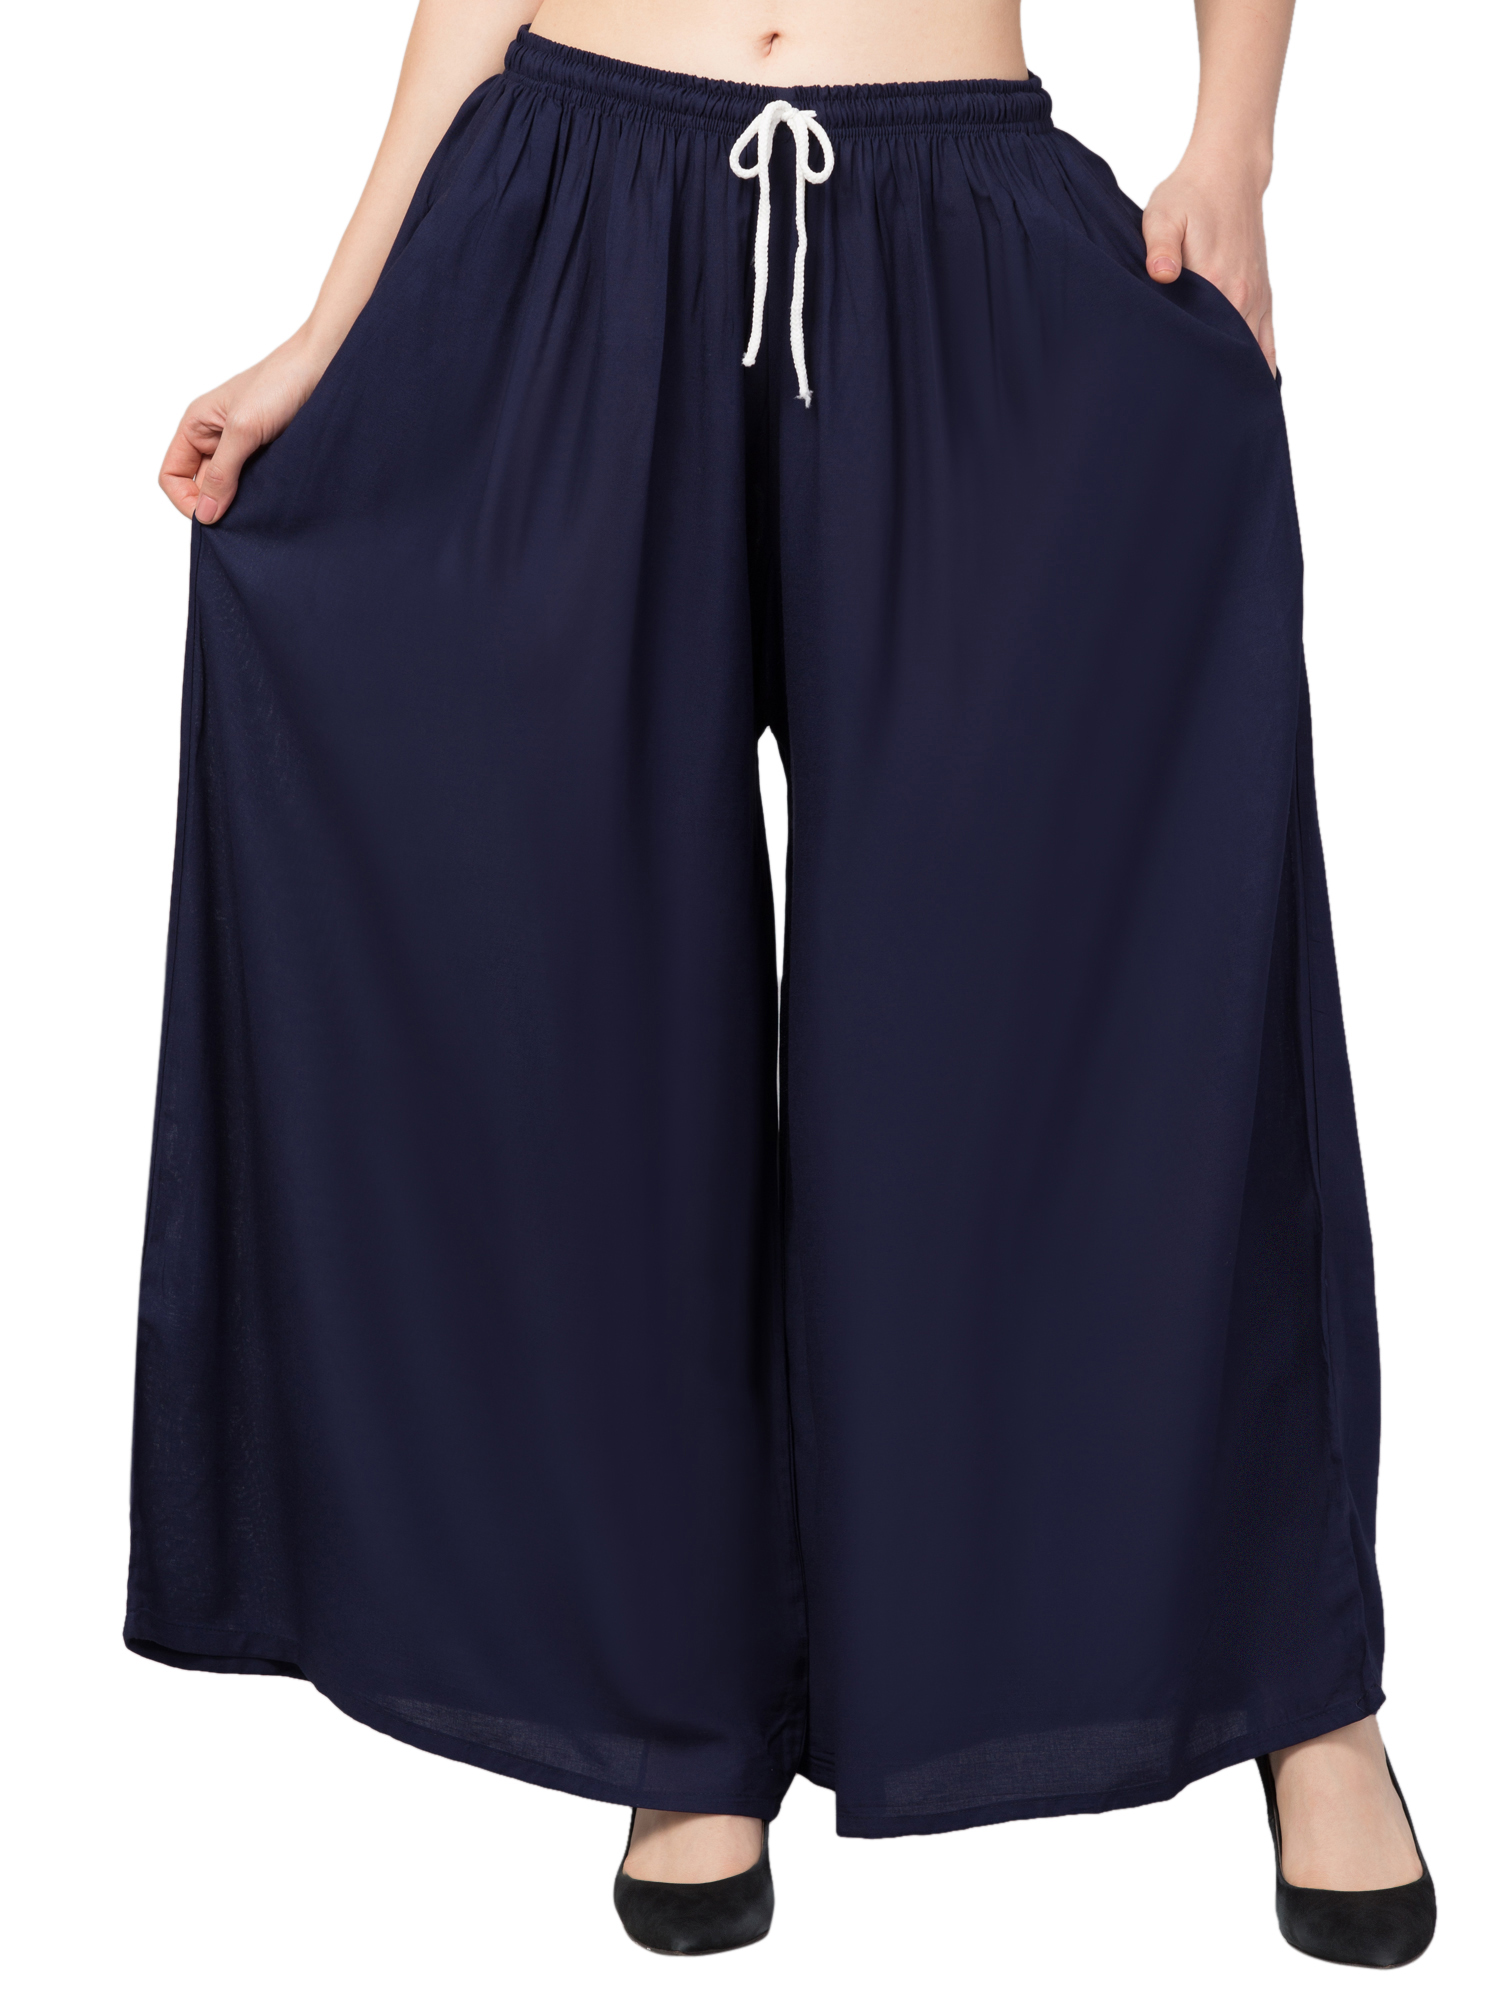 Wide Leg Pants for Women High Waisted Belted Palazzo Pants Solid Casual  Baggy Flowy Lounge Trousers with Pockets Dark Blue - Walmart.com